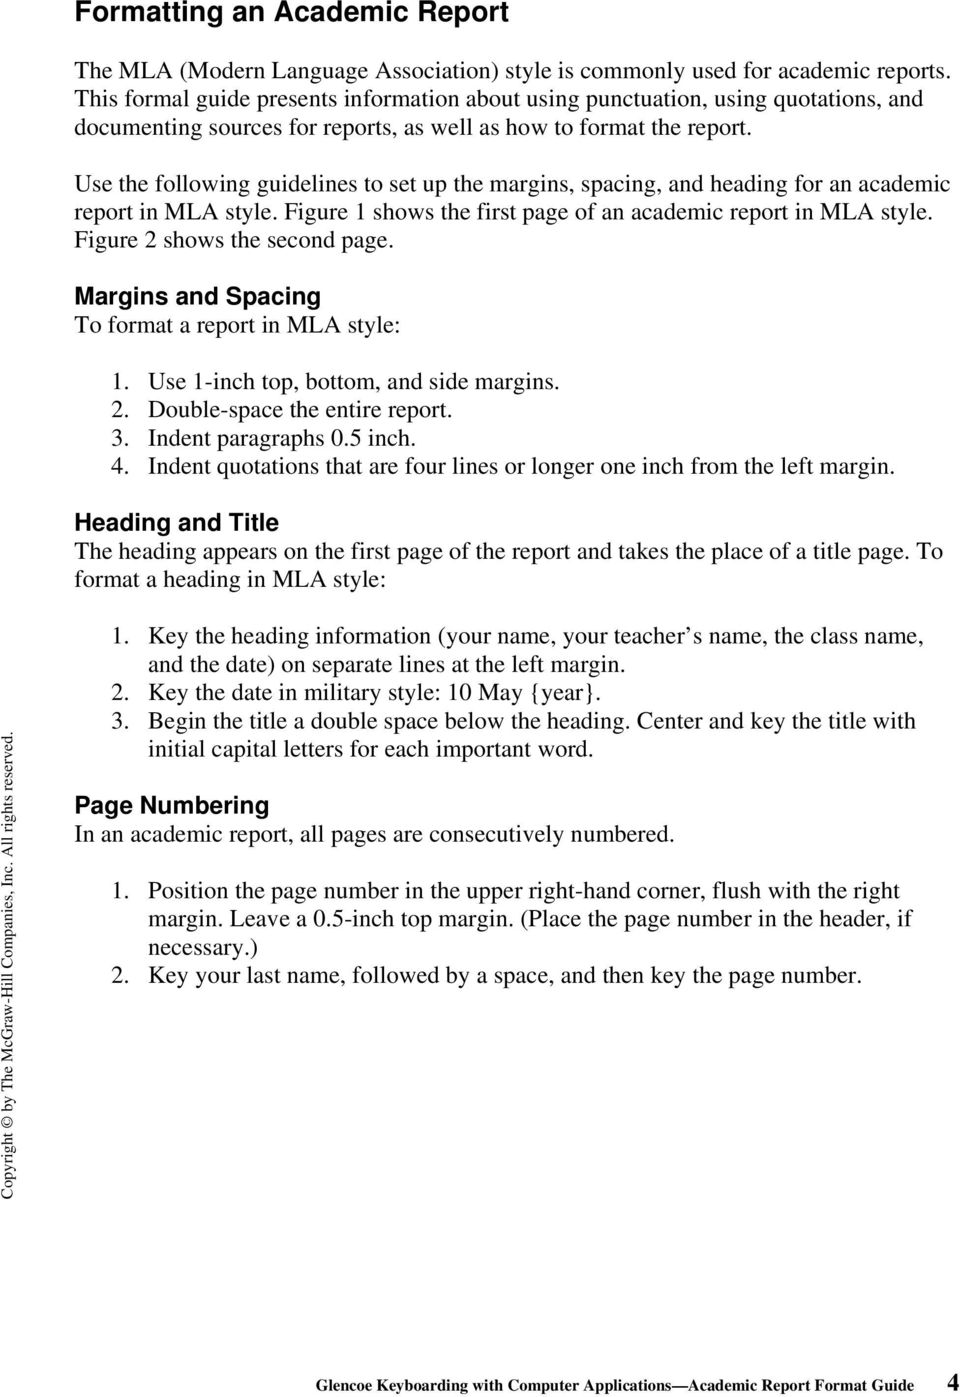 Use the following guidelines to set up the margins, spacing, and heading for an academic report in MLA style. Figure 1 shows the first page of an academic report in MLA style.